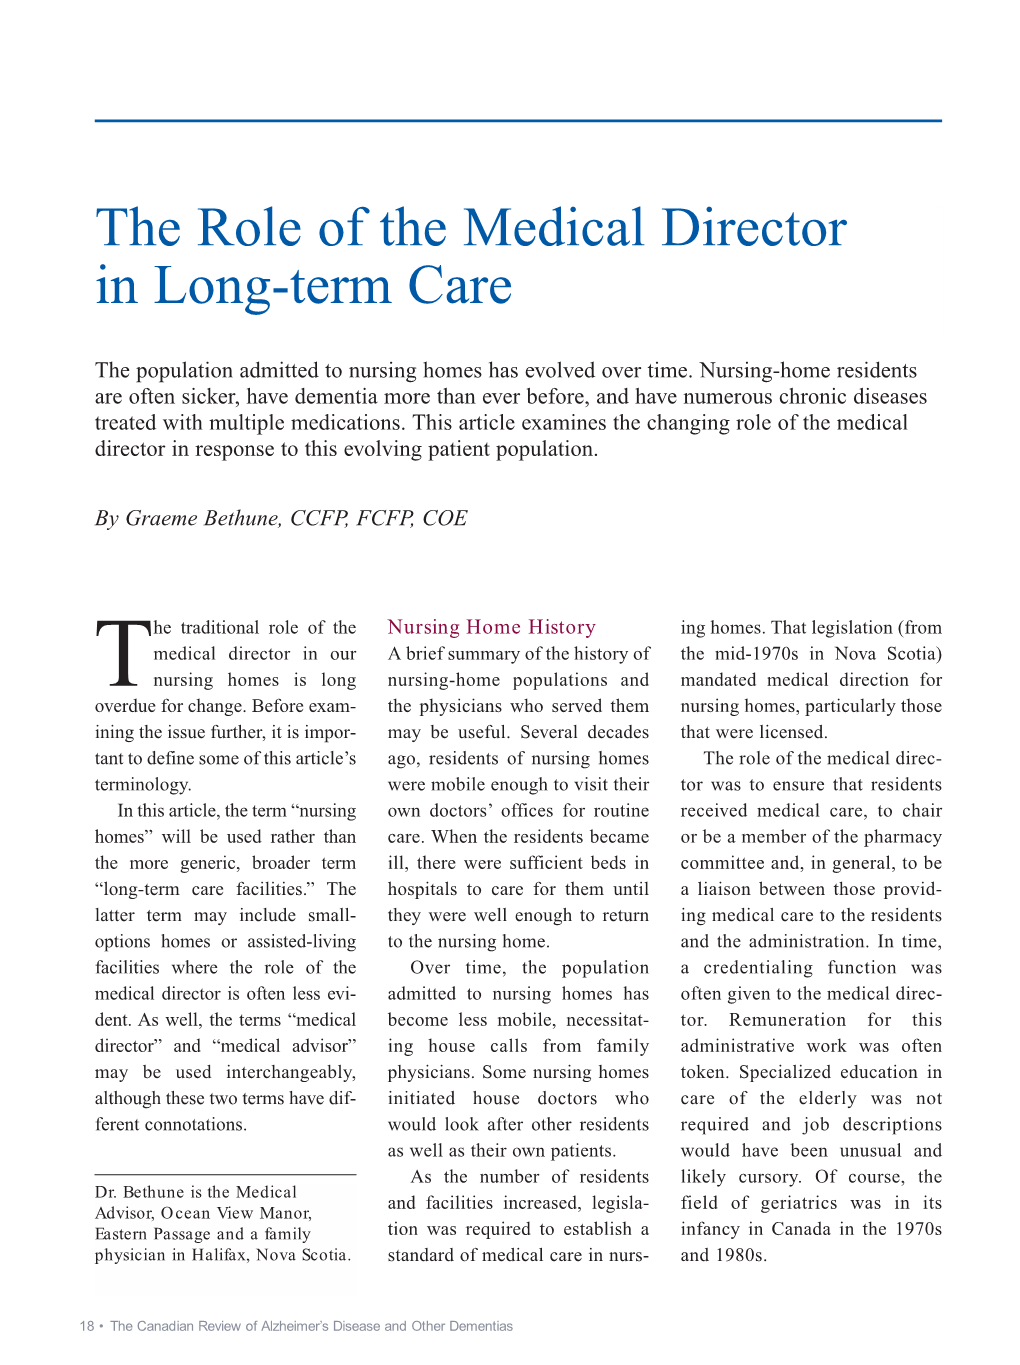 The Role of the Medical Director in Long-Term Care